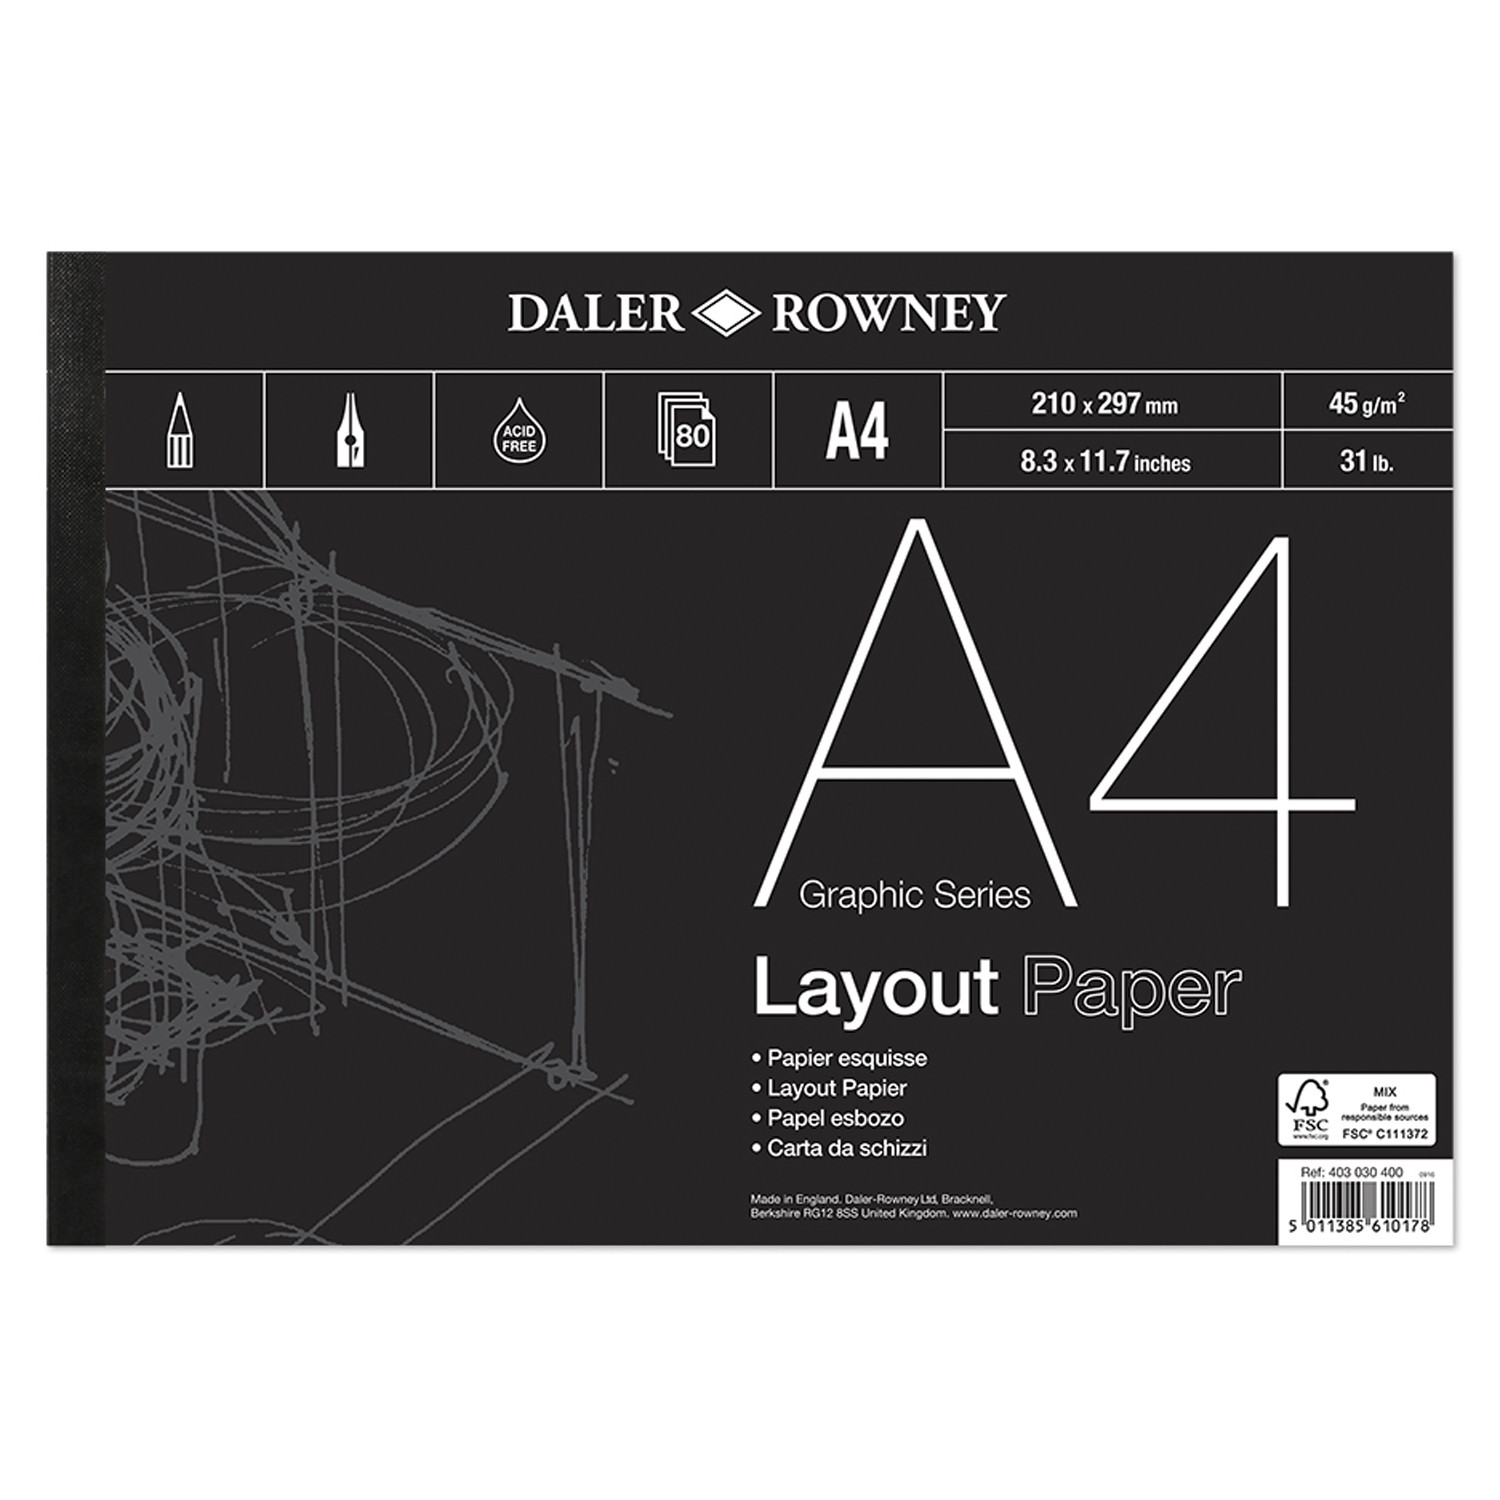 Daler-Rowney Graphic Series Layout Pad - A4 Image